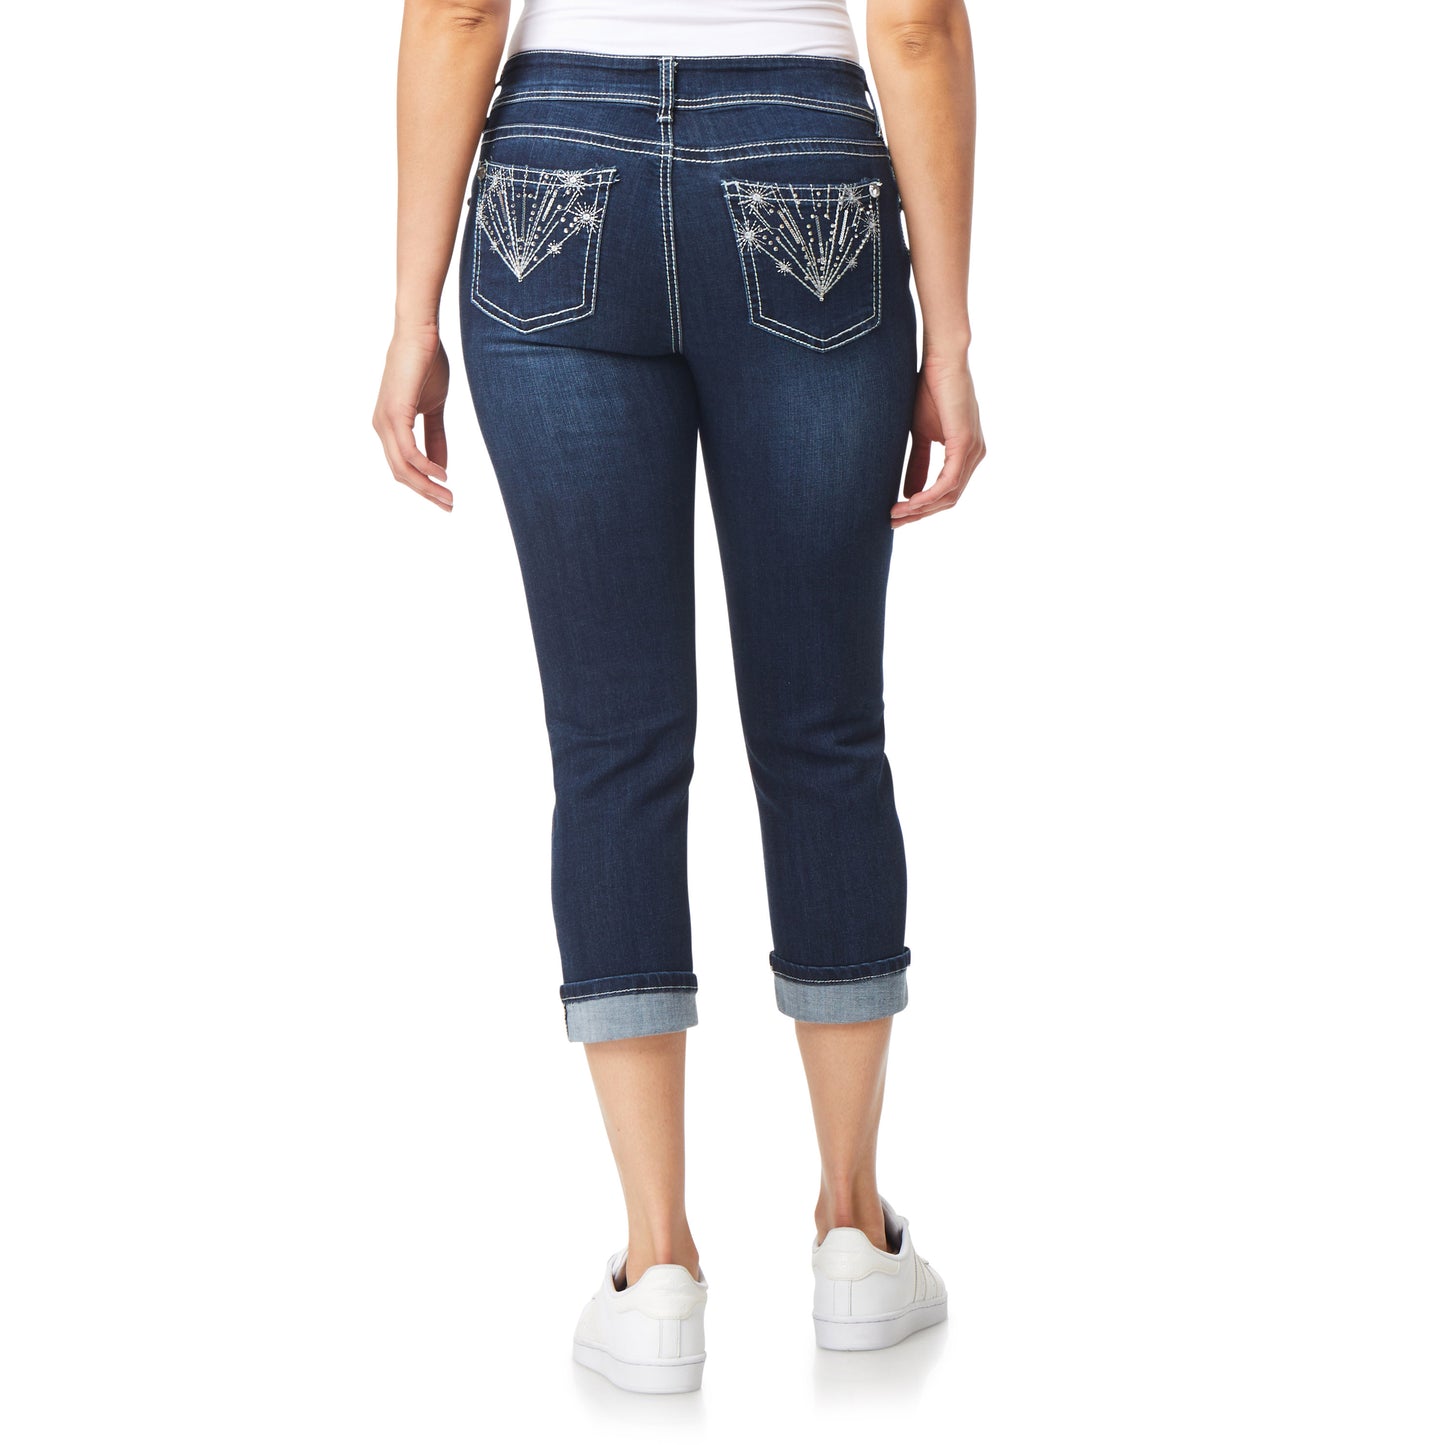 InstaStretch Luscious Curvy Bling Crop Jeans